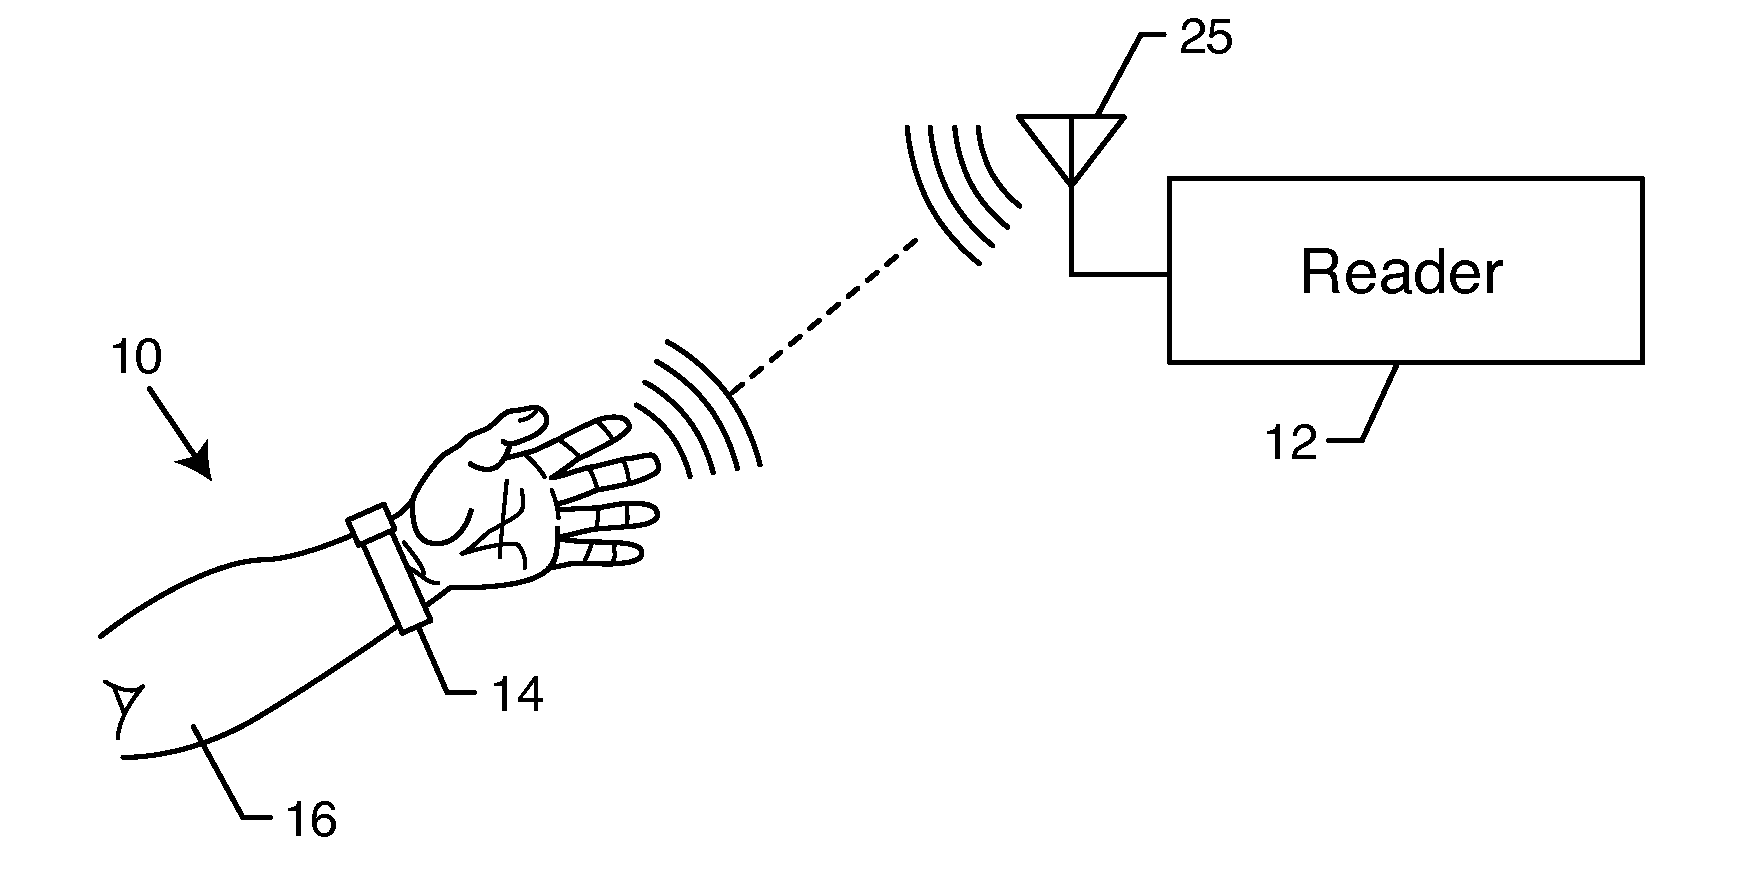 Semi-active RFID tag and related processes